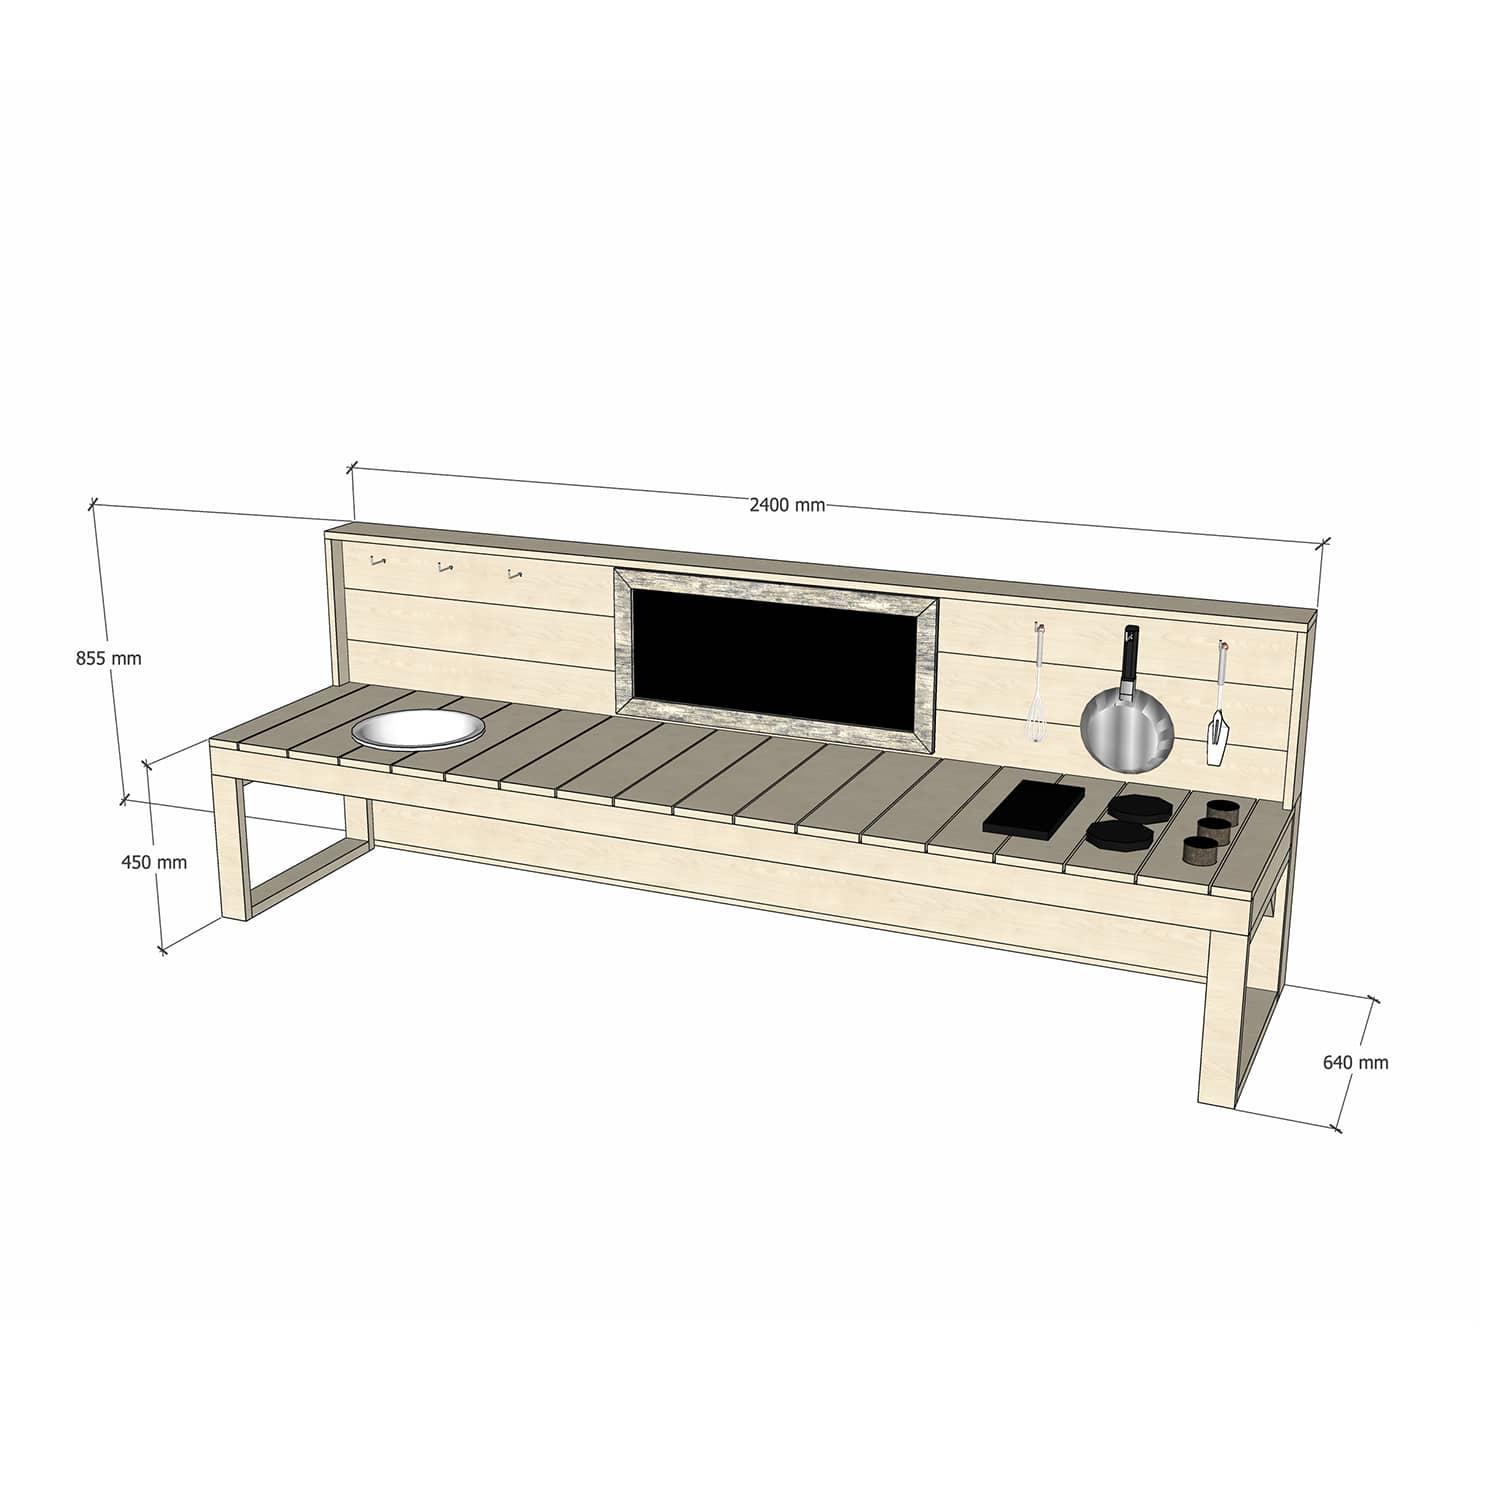 Kids&#39; Wooden Play Kitchens - Best suited undercover